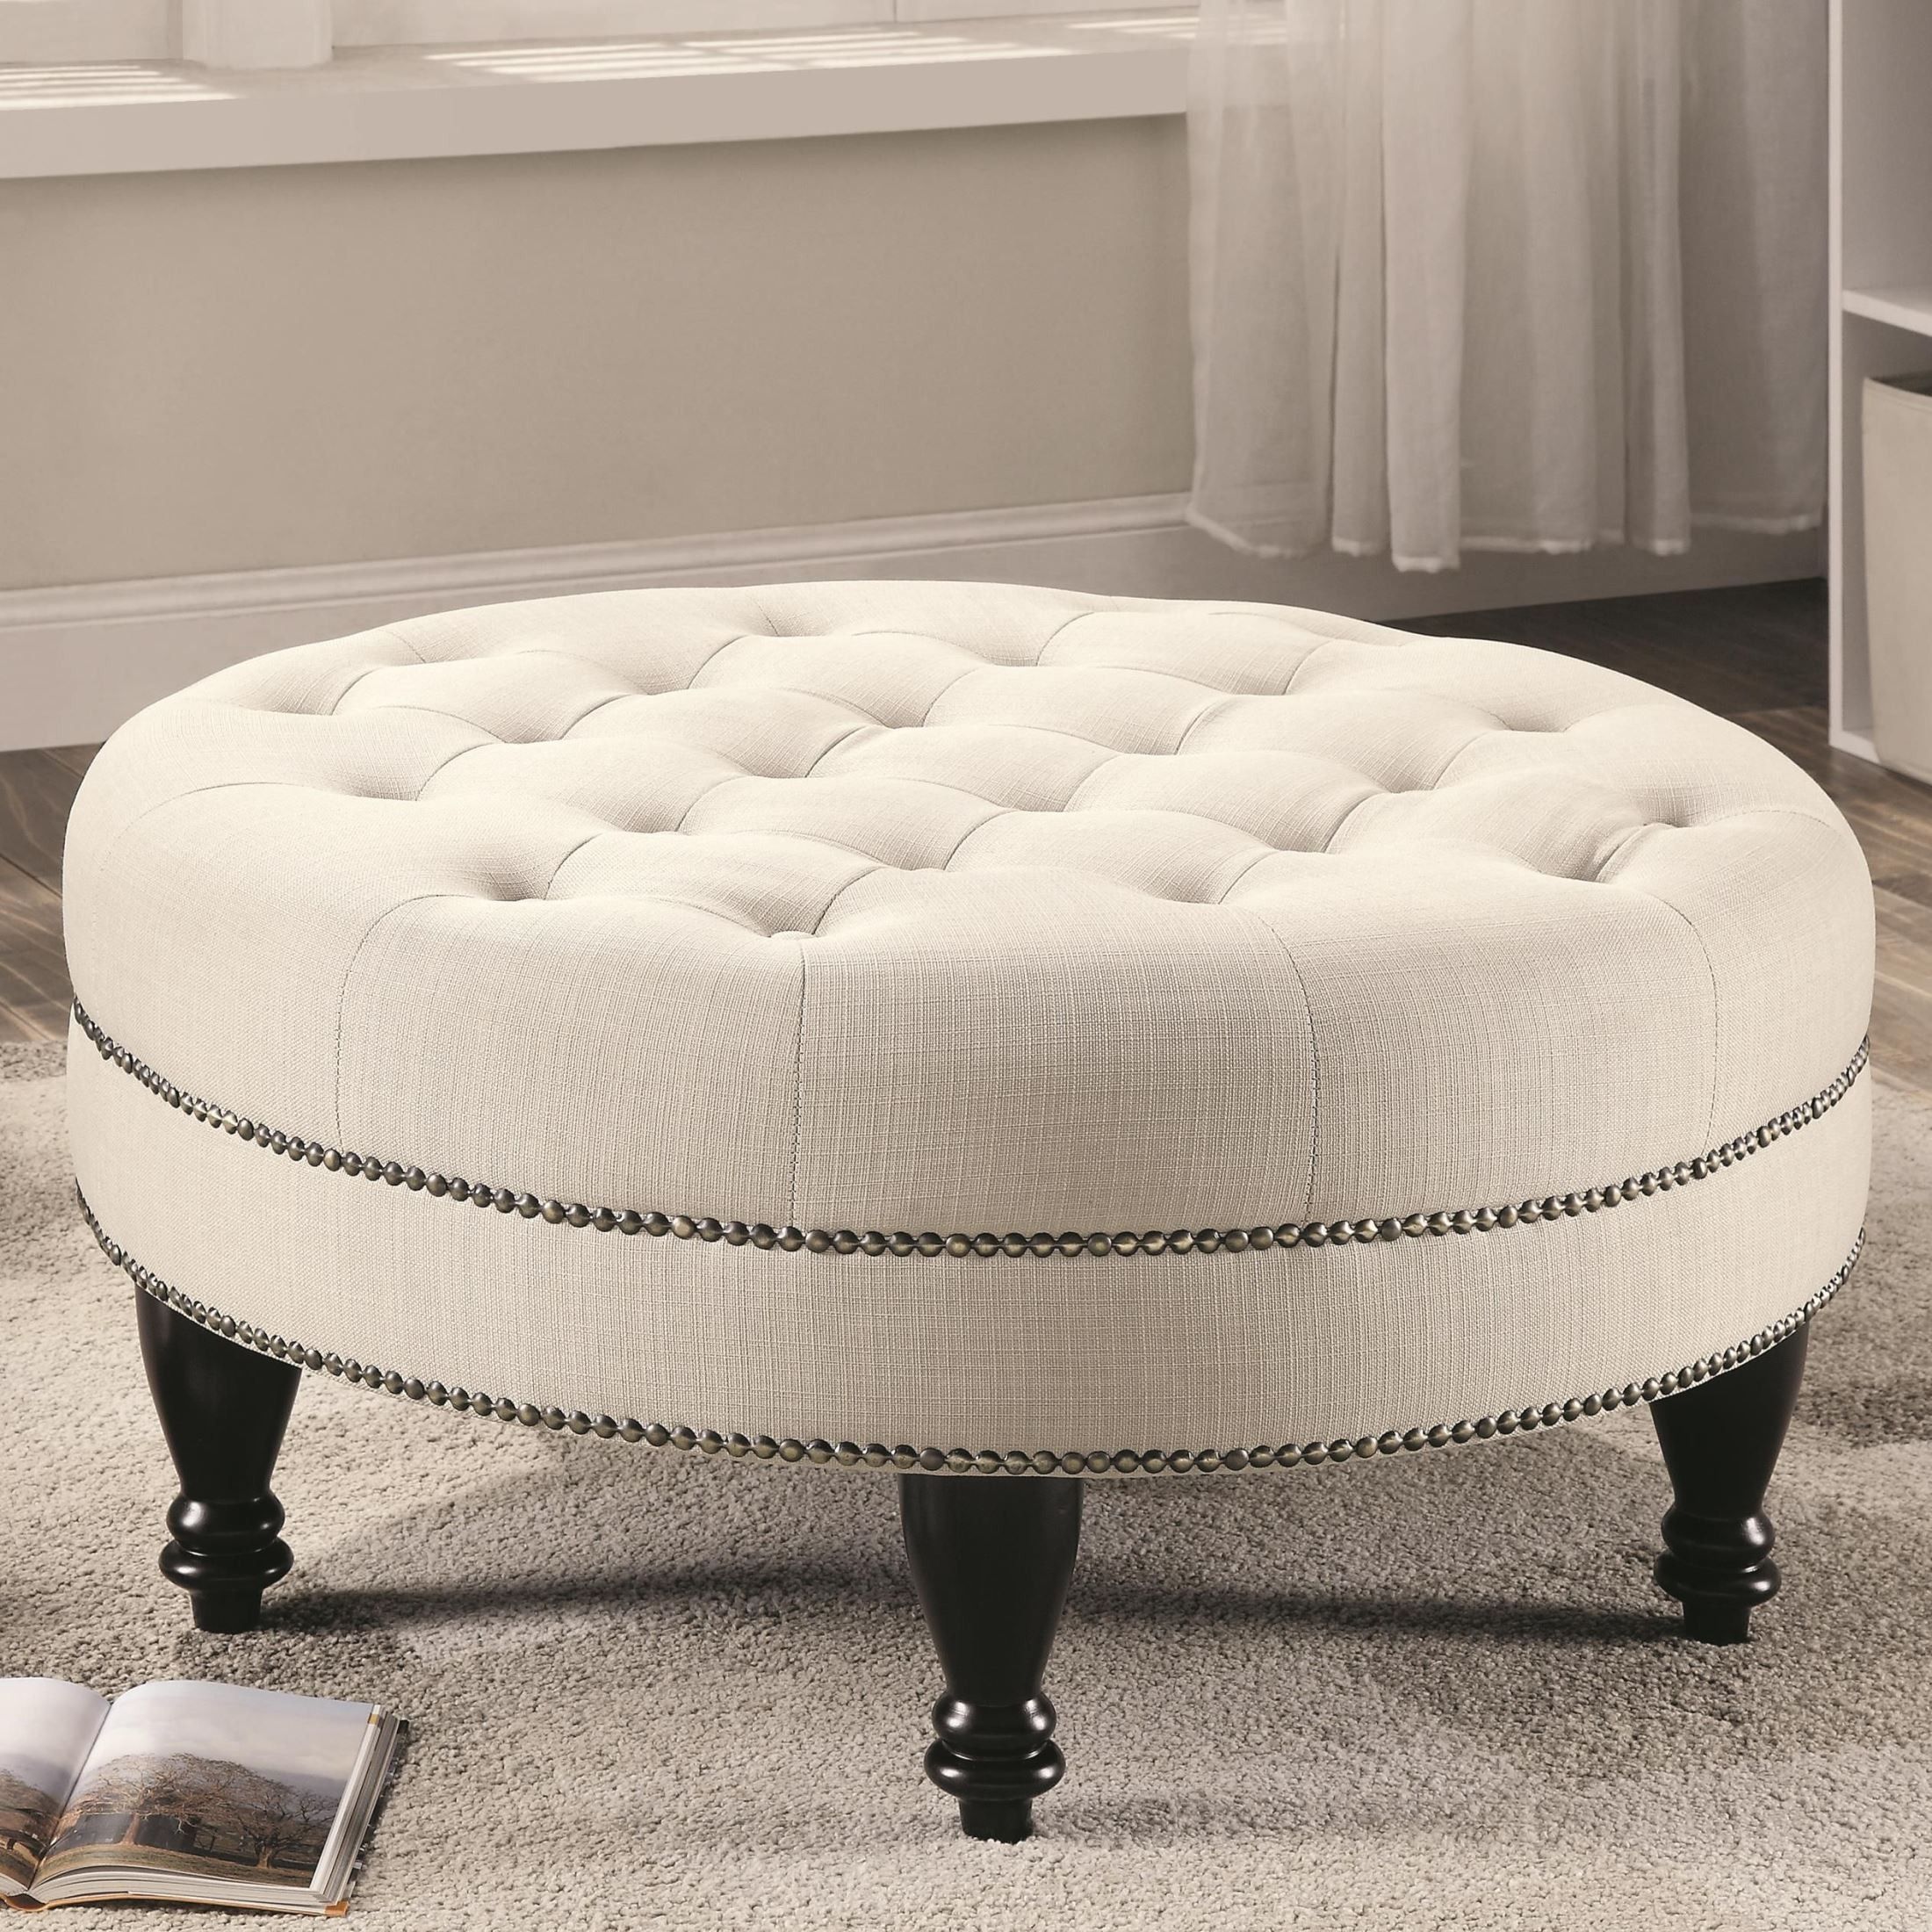 500018 Oatmeal Large Round Ottoman From Coaster (500018) | Coleman With Fabric Oversized Pouf Ottomans (View 4 of 20)